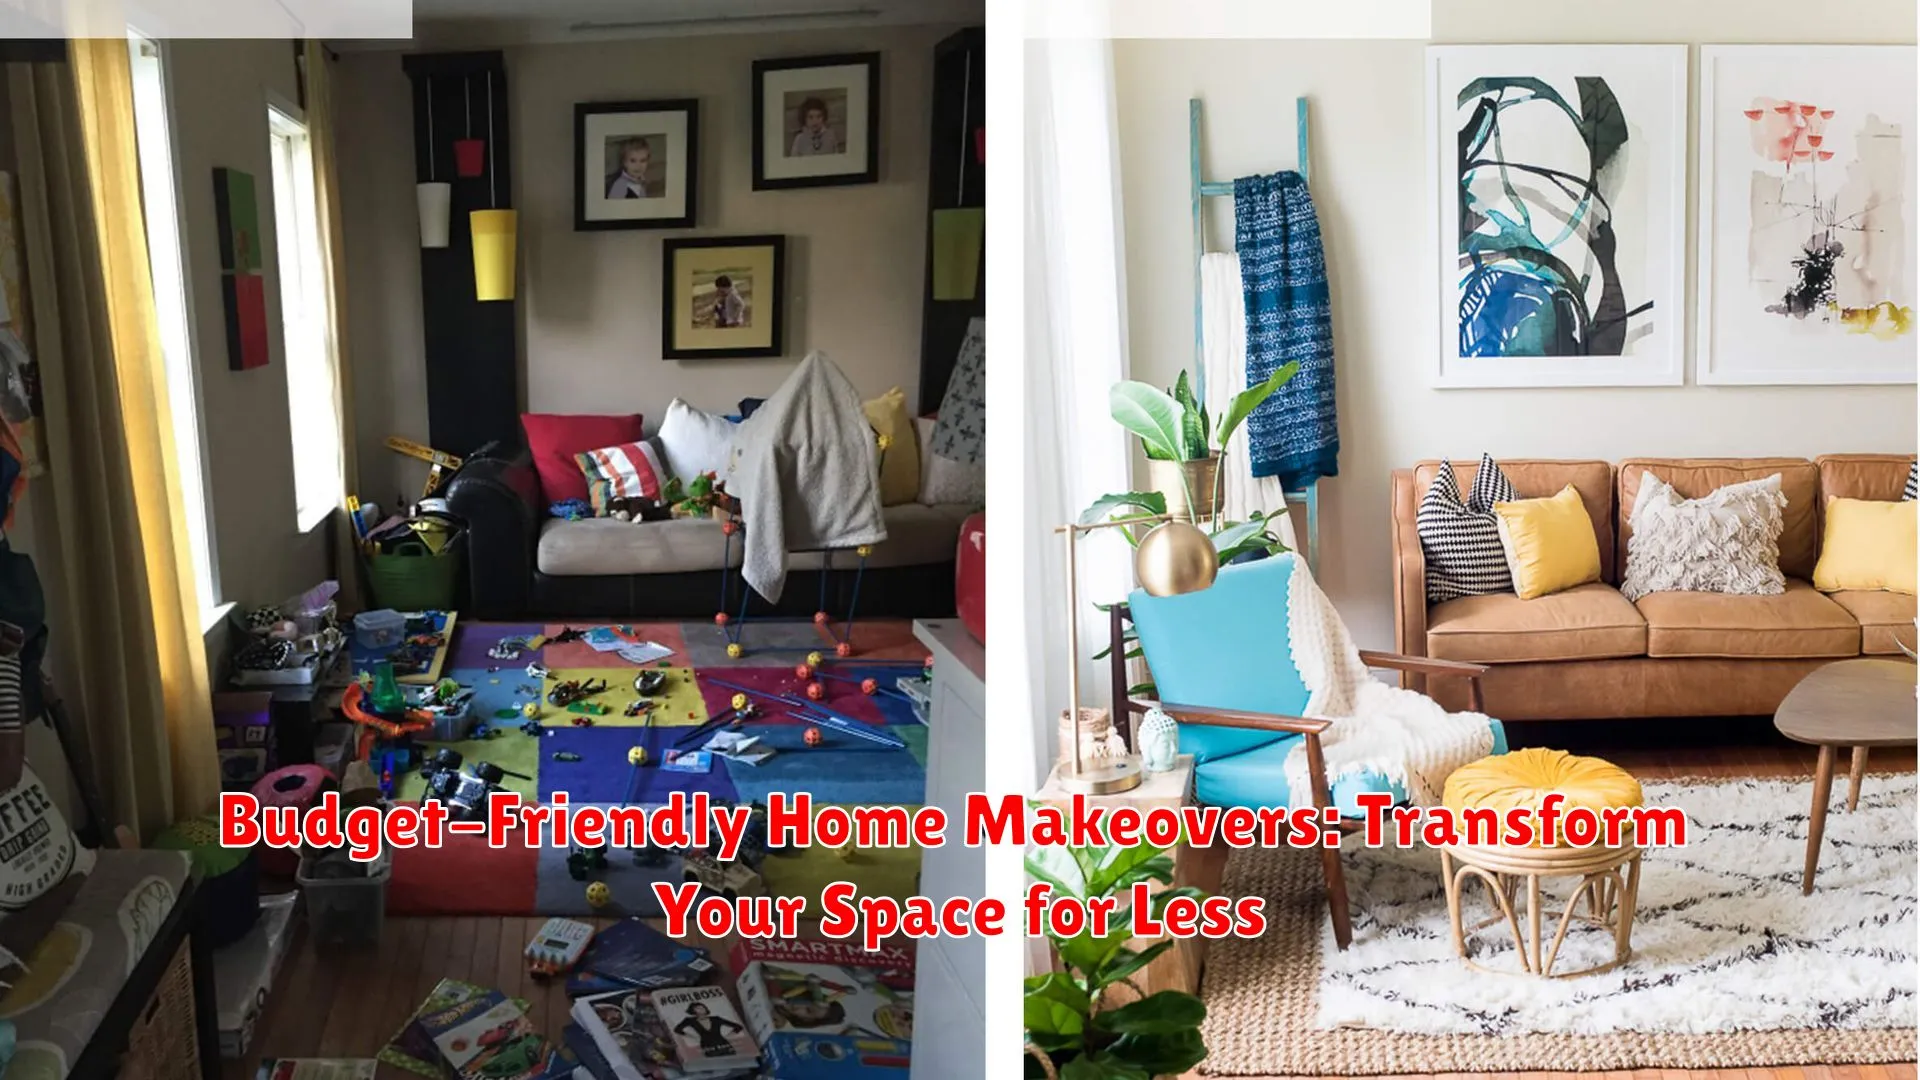 Budget-Friendly Home Makeovers: Transform Your Space for Less